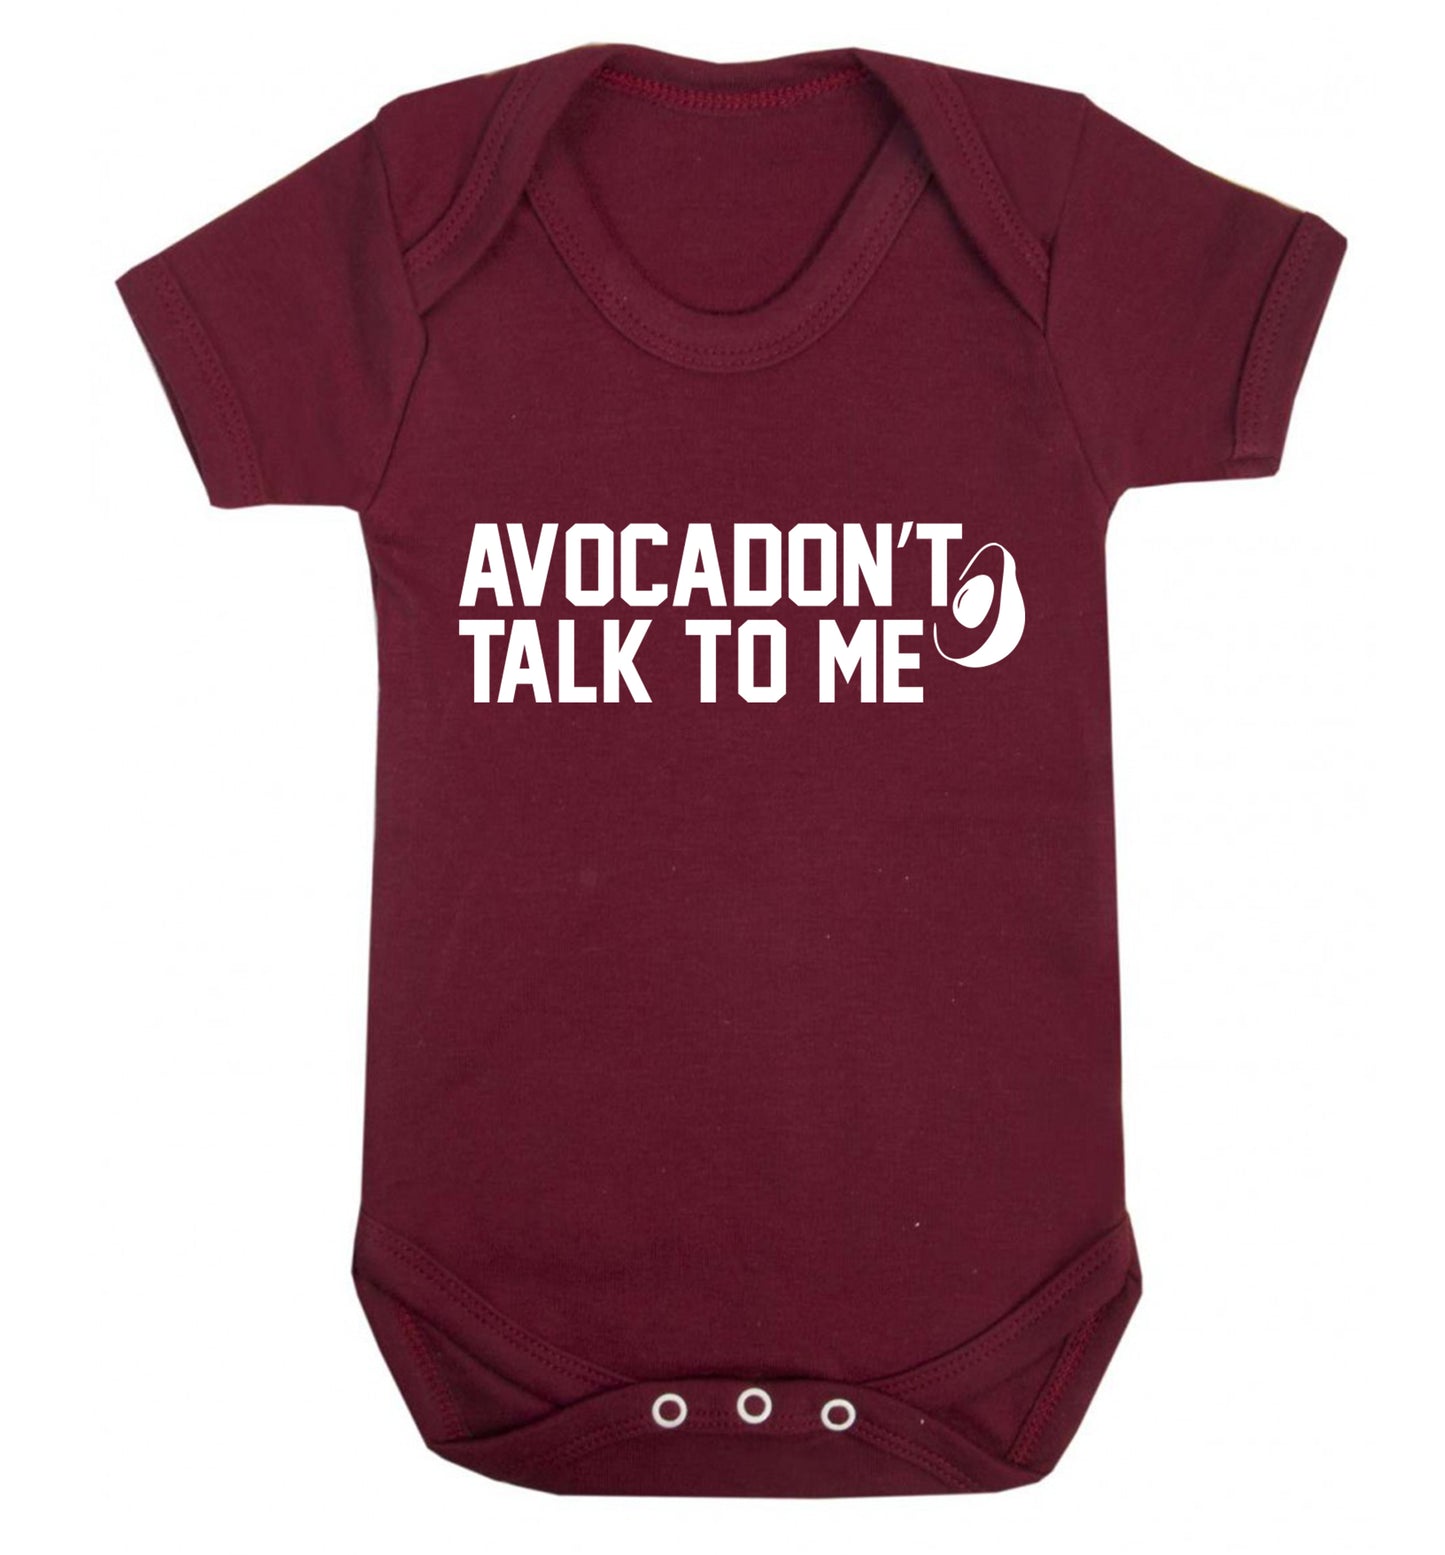 Avocadon't talk to me Baby Vest maroon 18-24 months